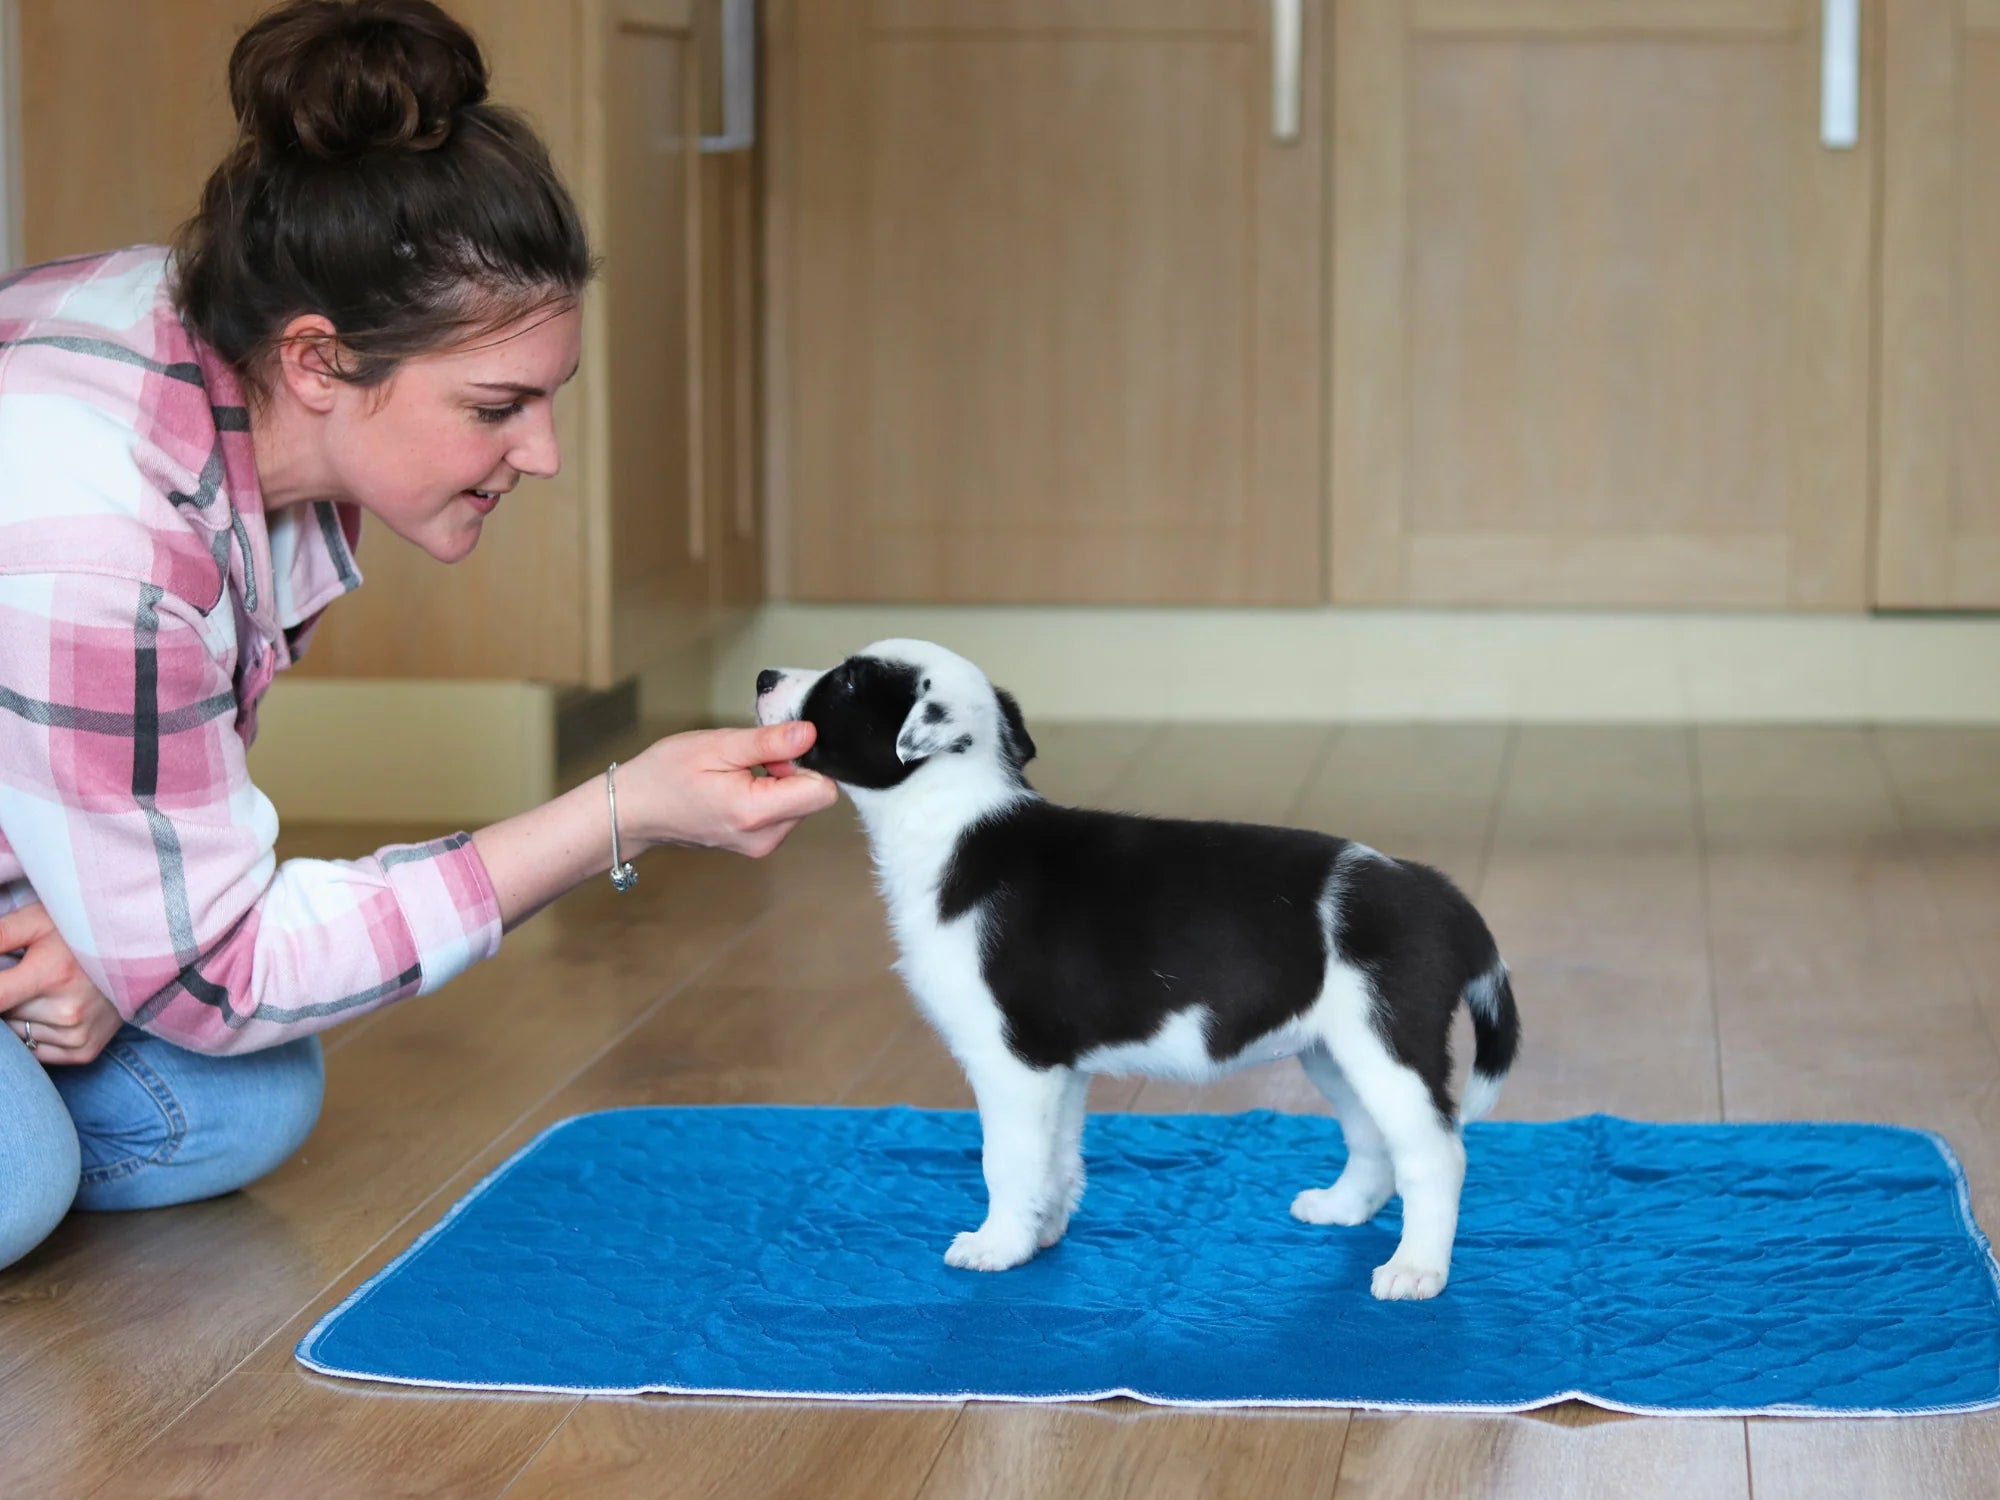 A puppy stood on a washable puppy pad, being petted by a woman